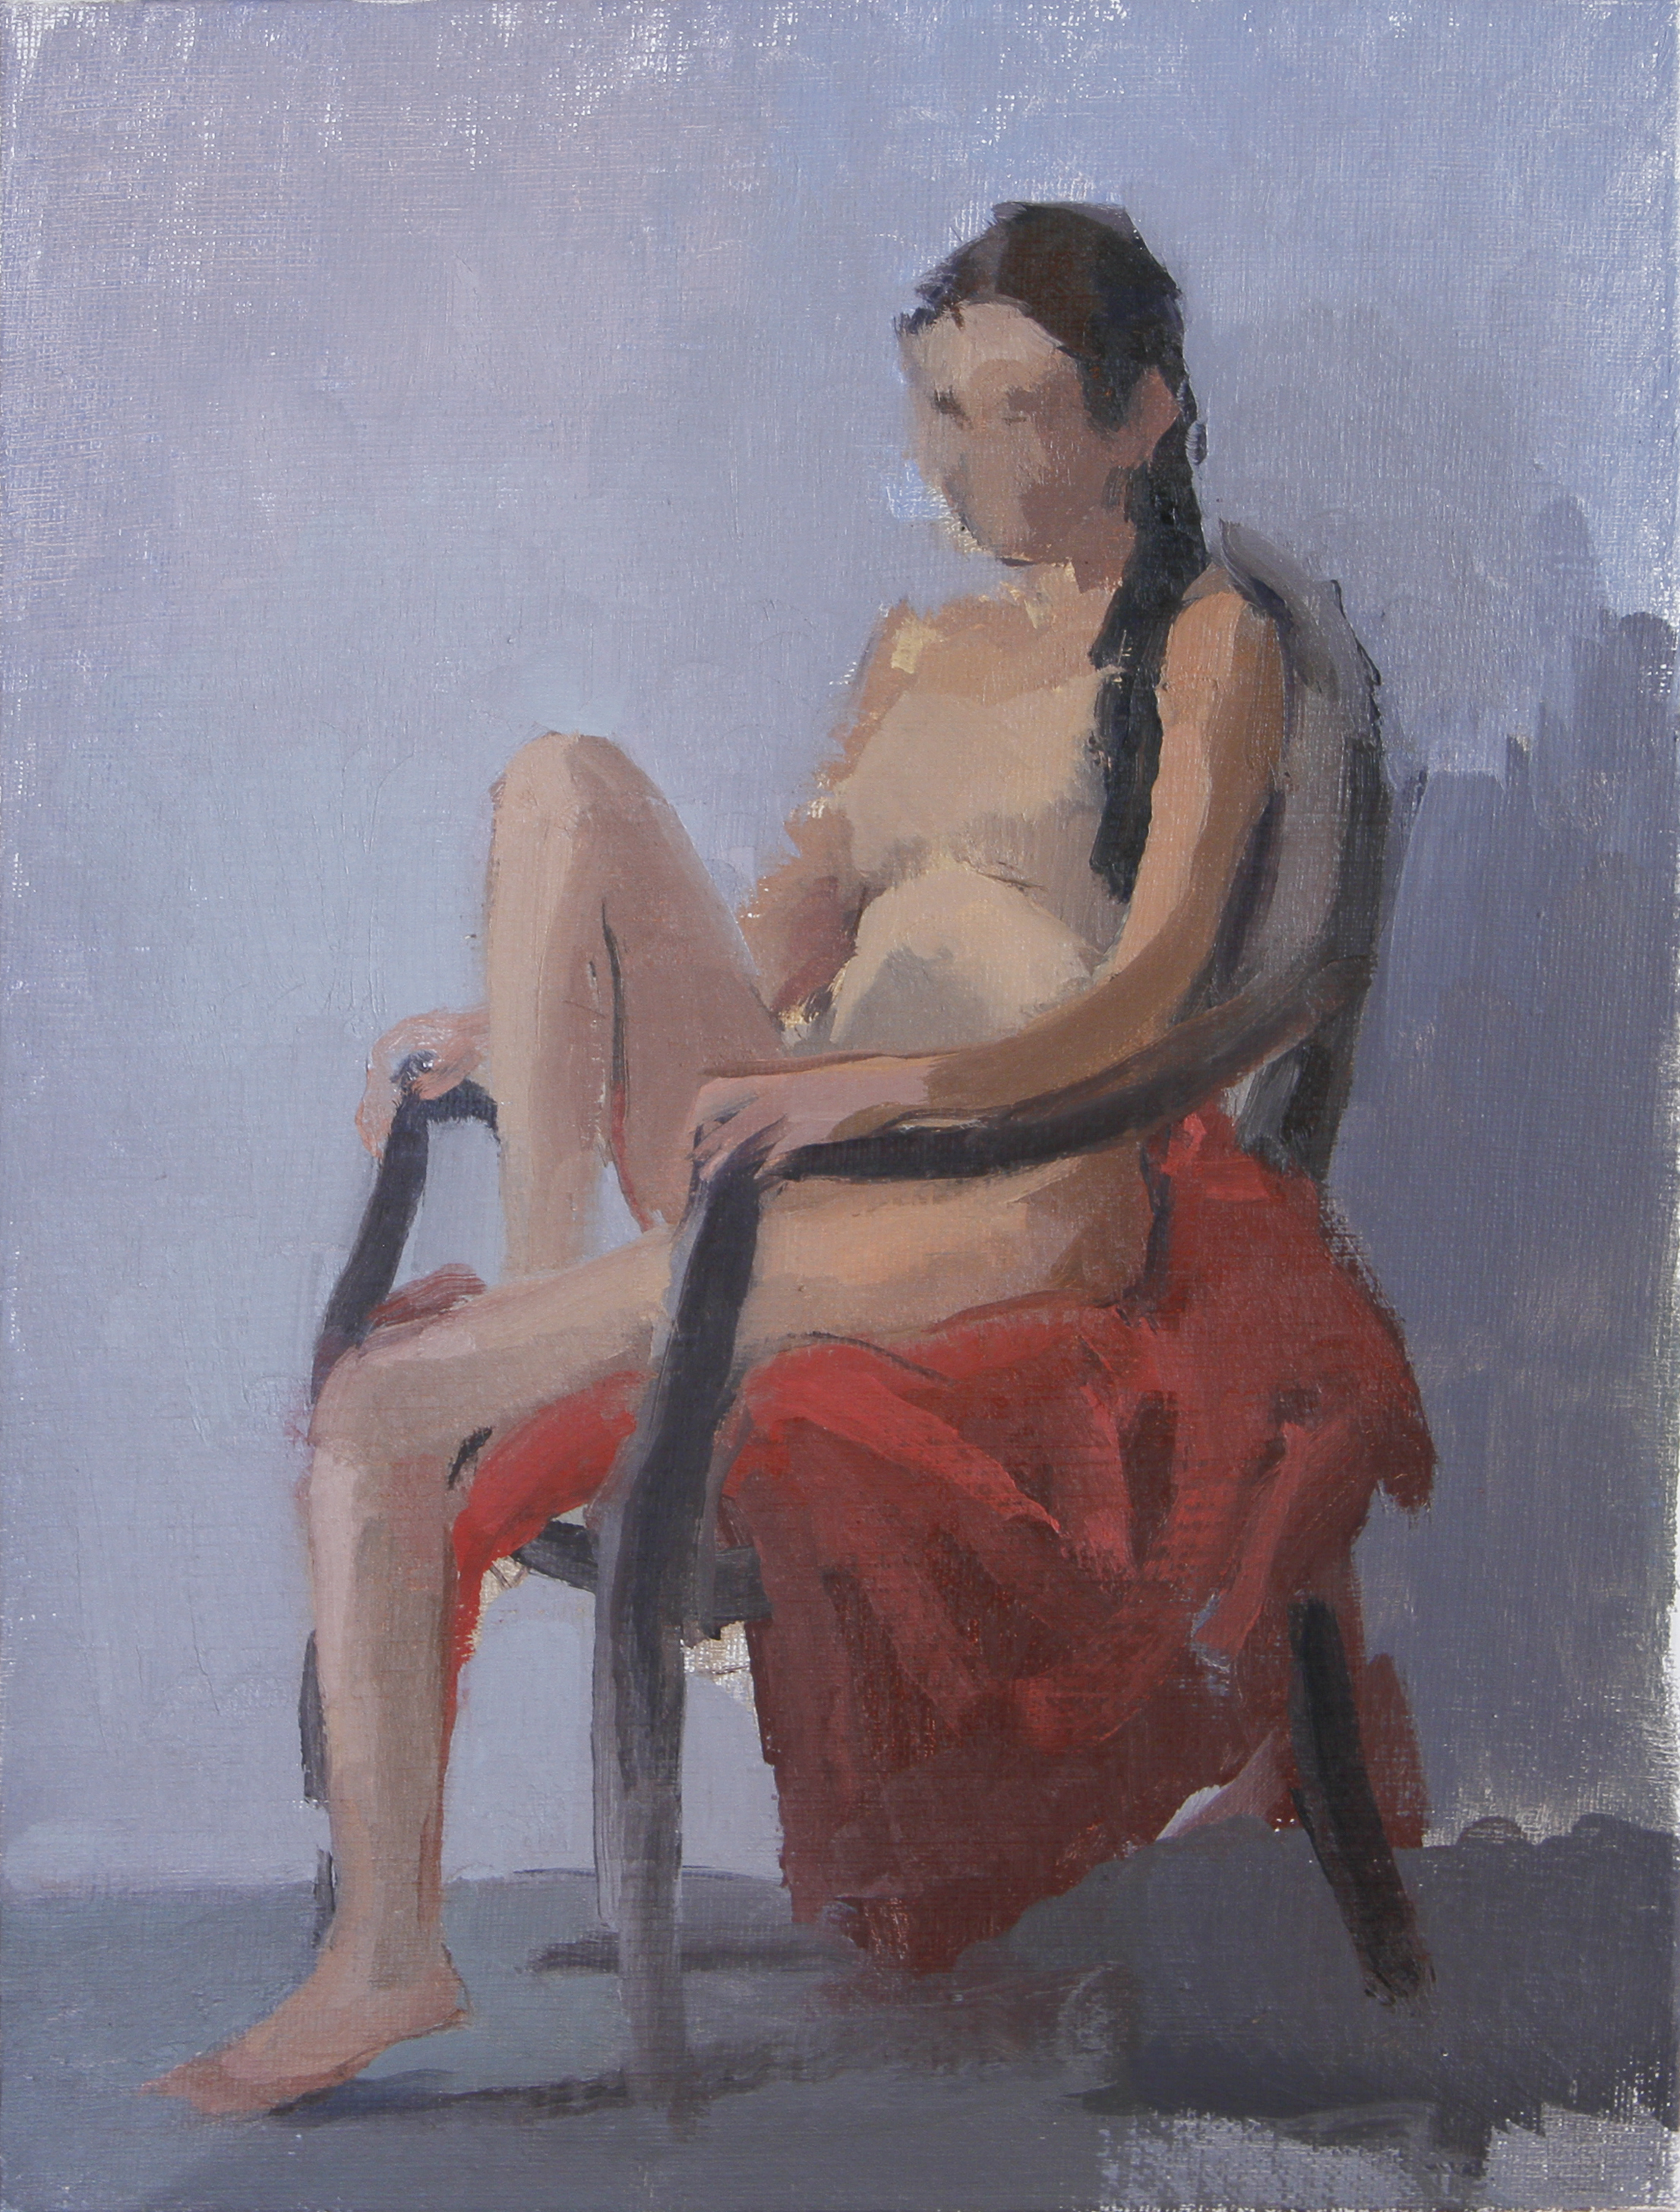    seated nude     oil on canvas 8x10" 2013  private collection Brooklyn, NY 